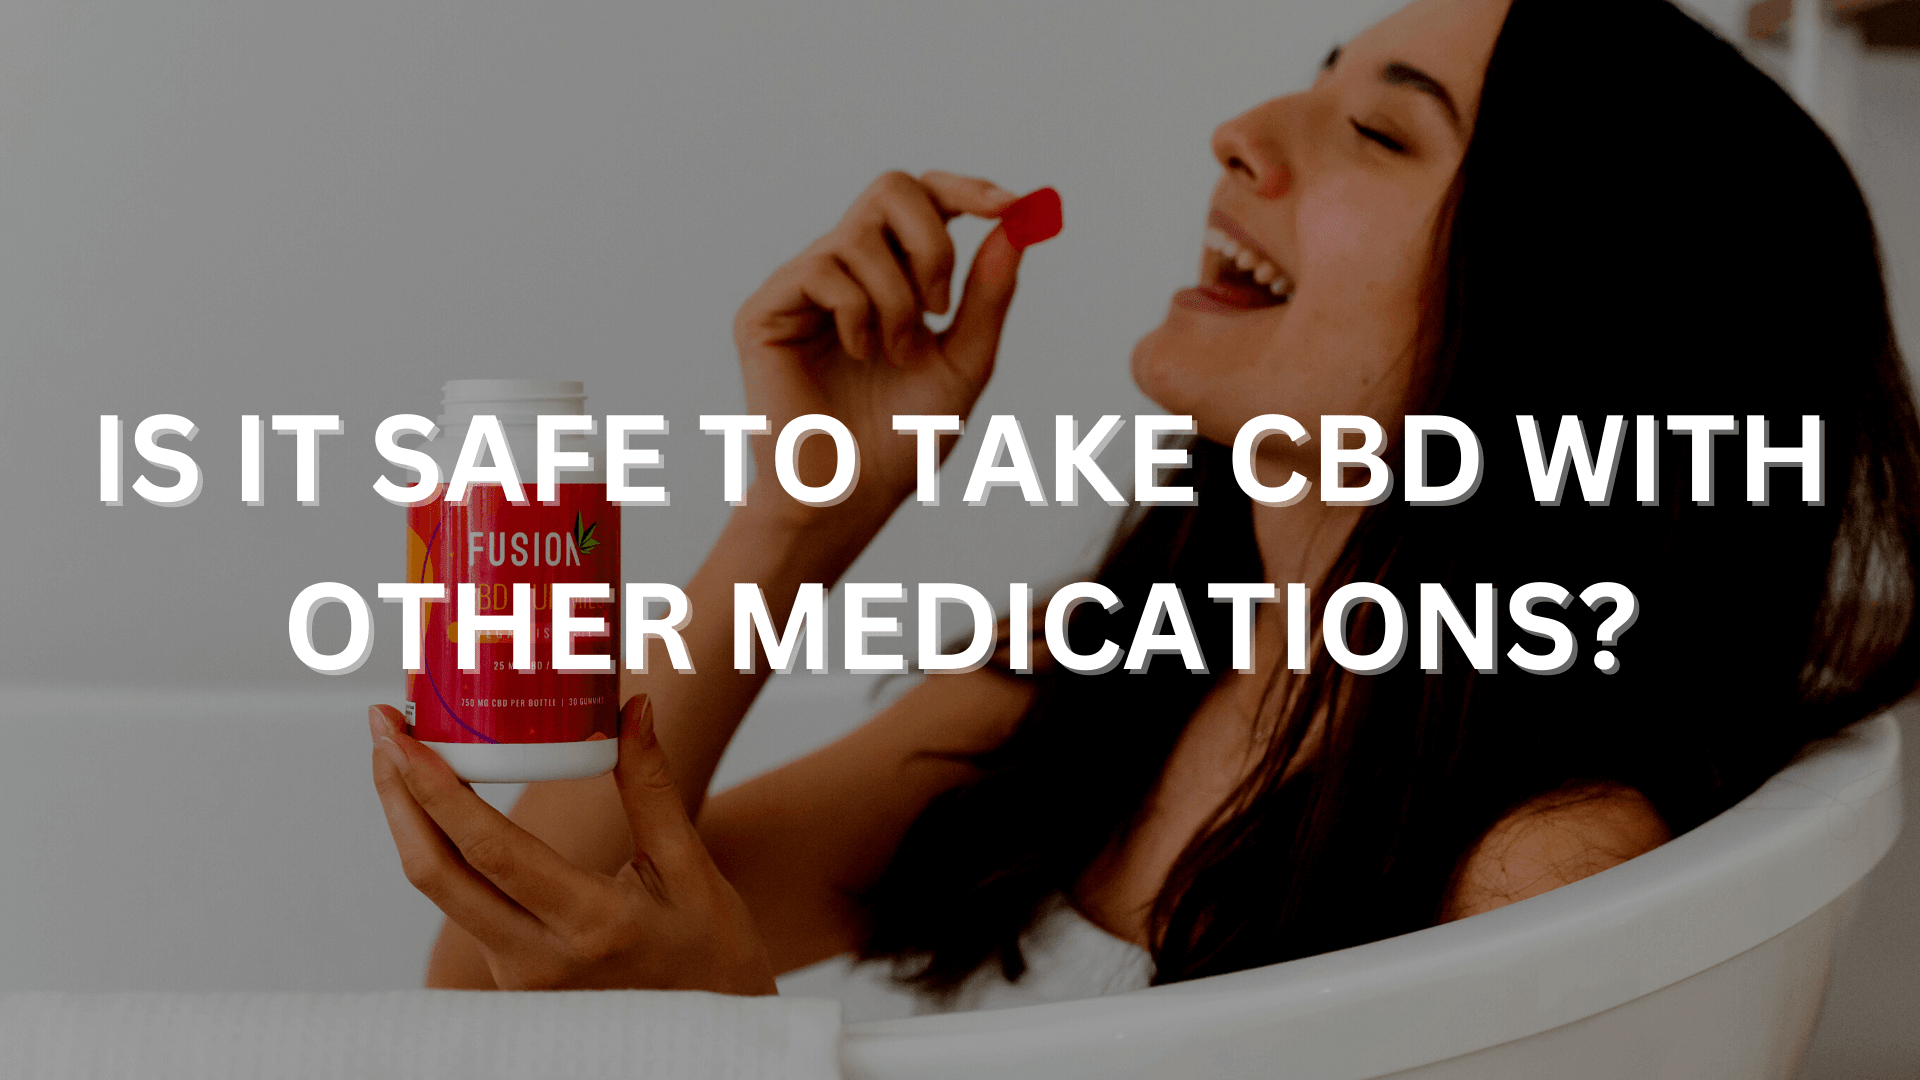  Is It Safe to Take CBD With Other Medications?